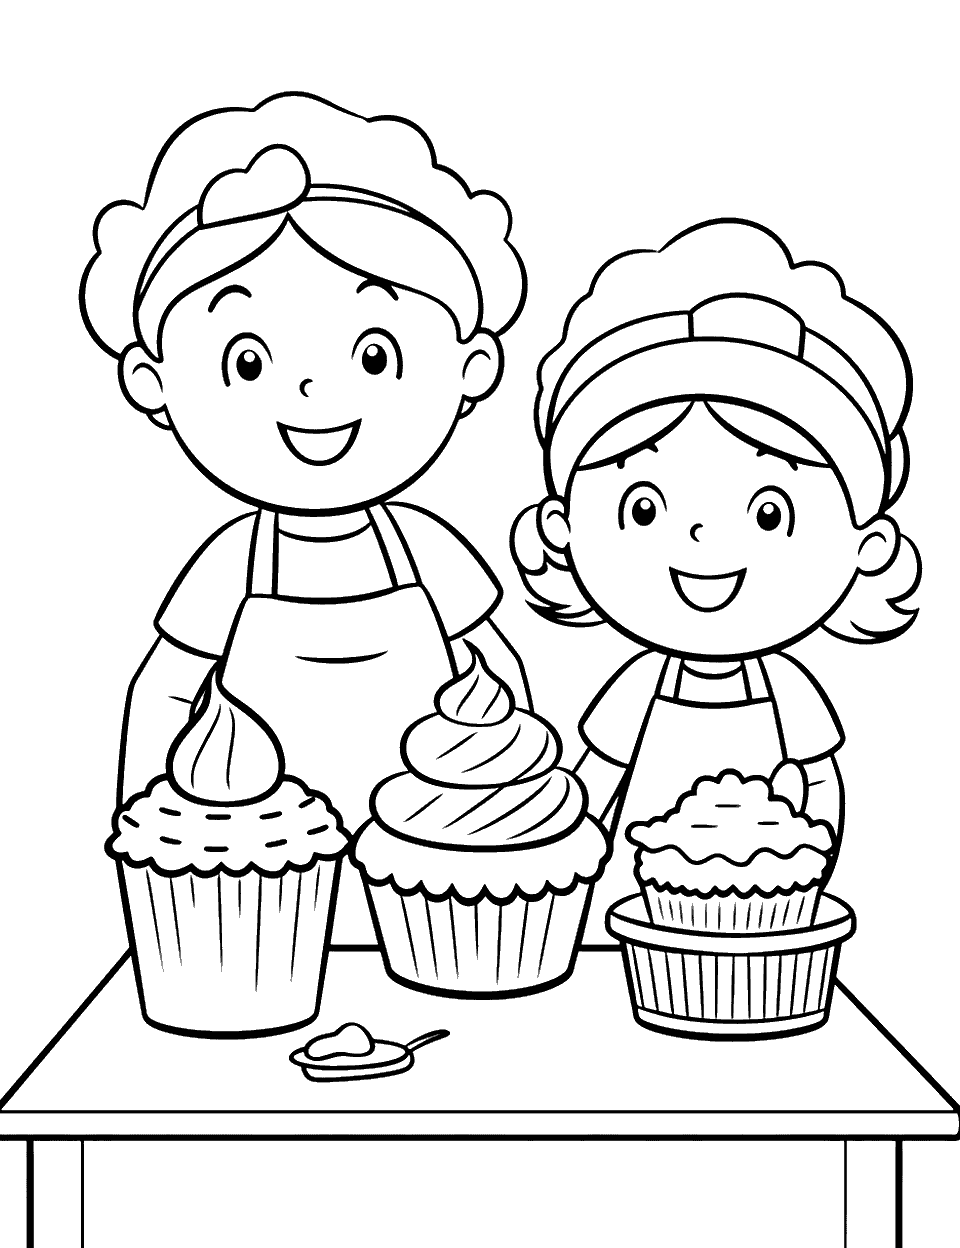 Baking Time in the Kitchen Cupcake Coloring Page - A kitchen scene with cupcakes being prepared on the counter.